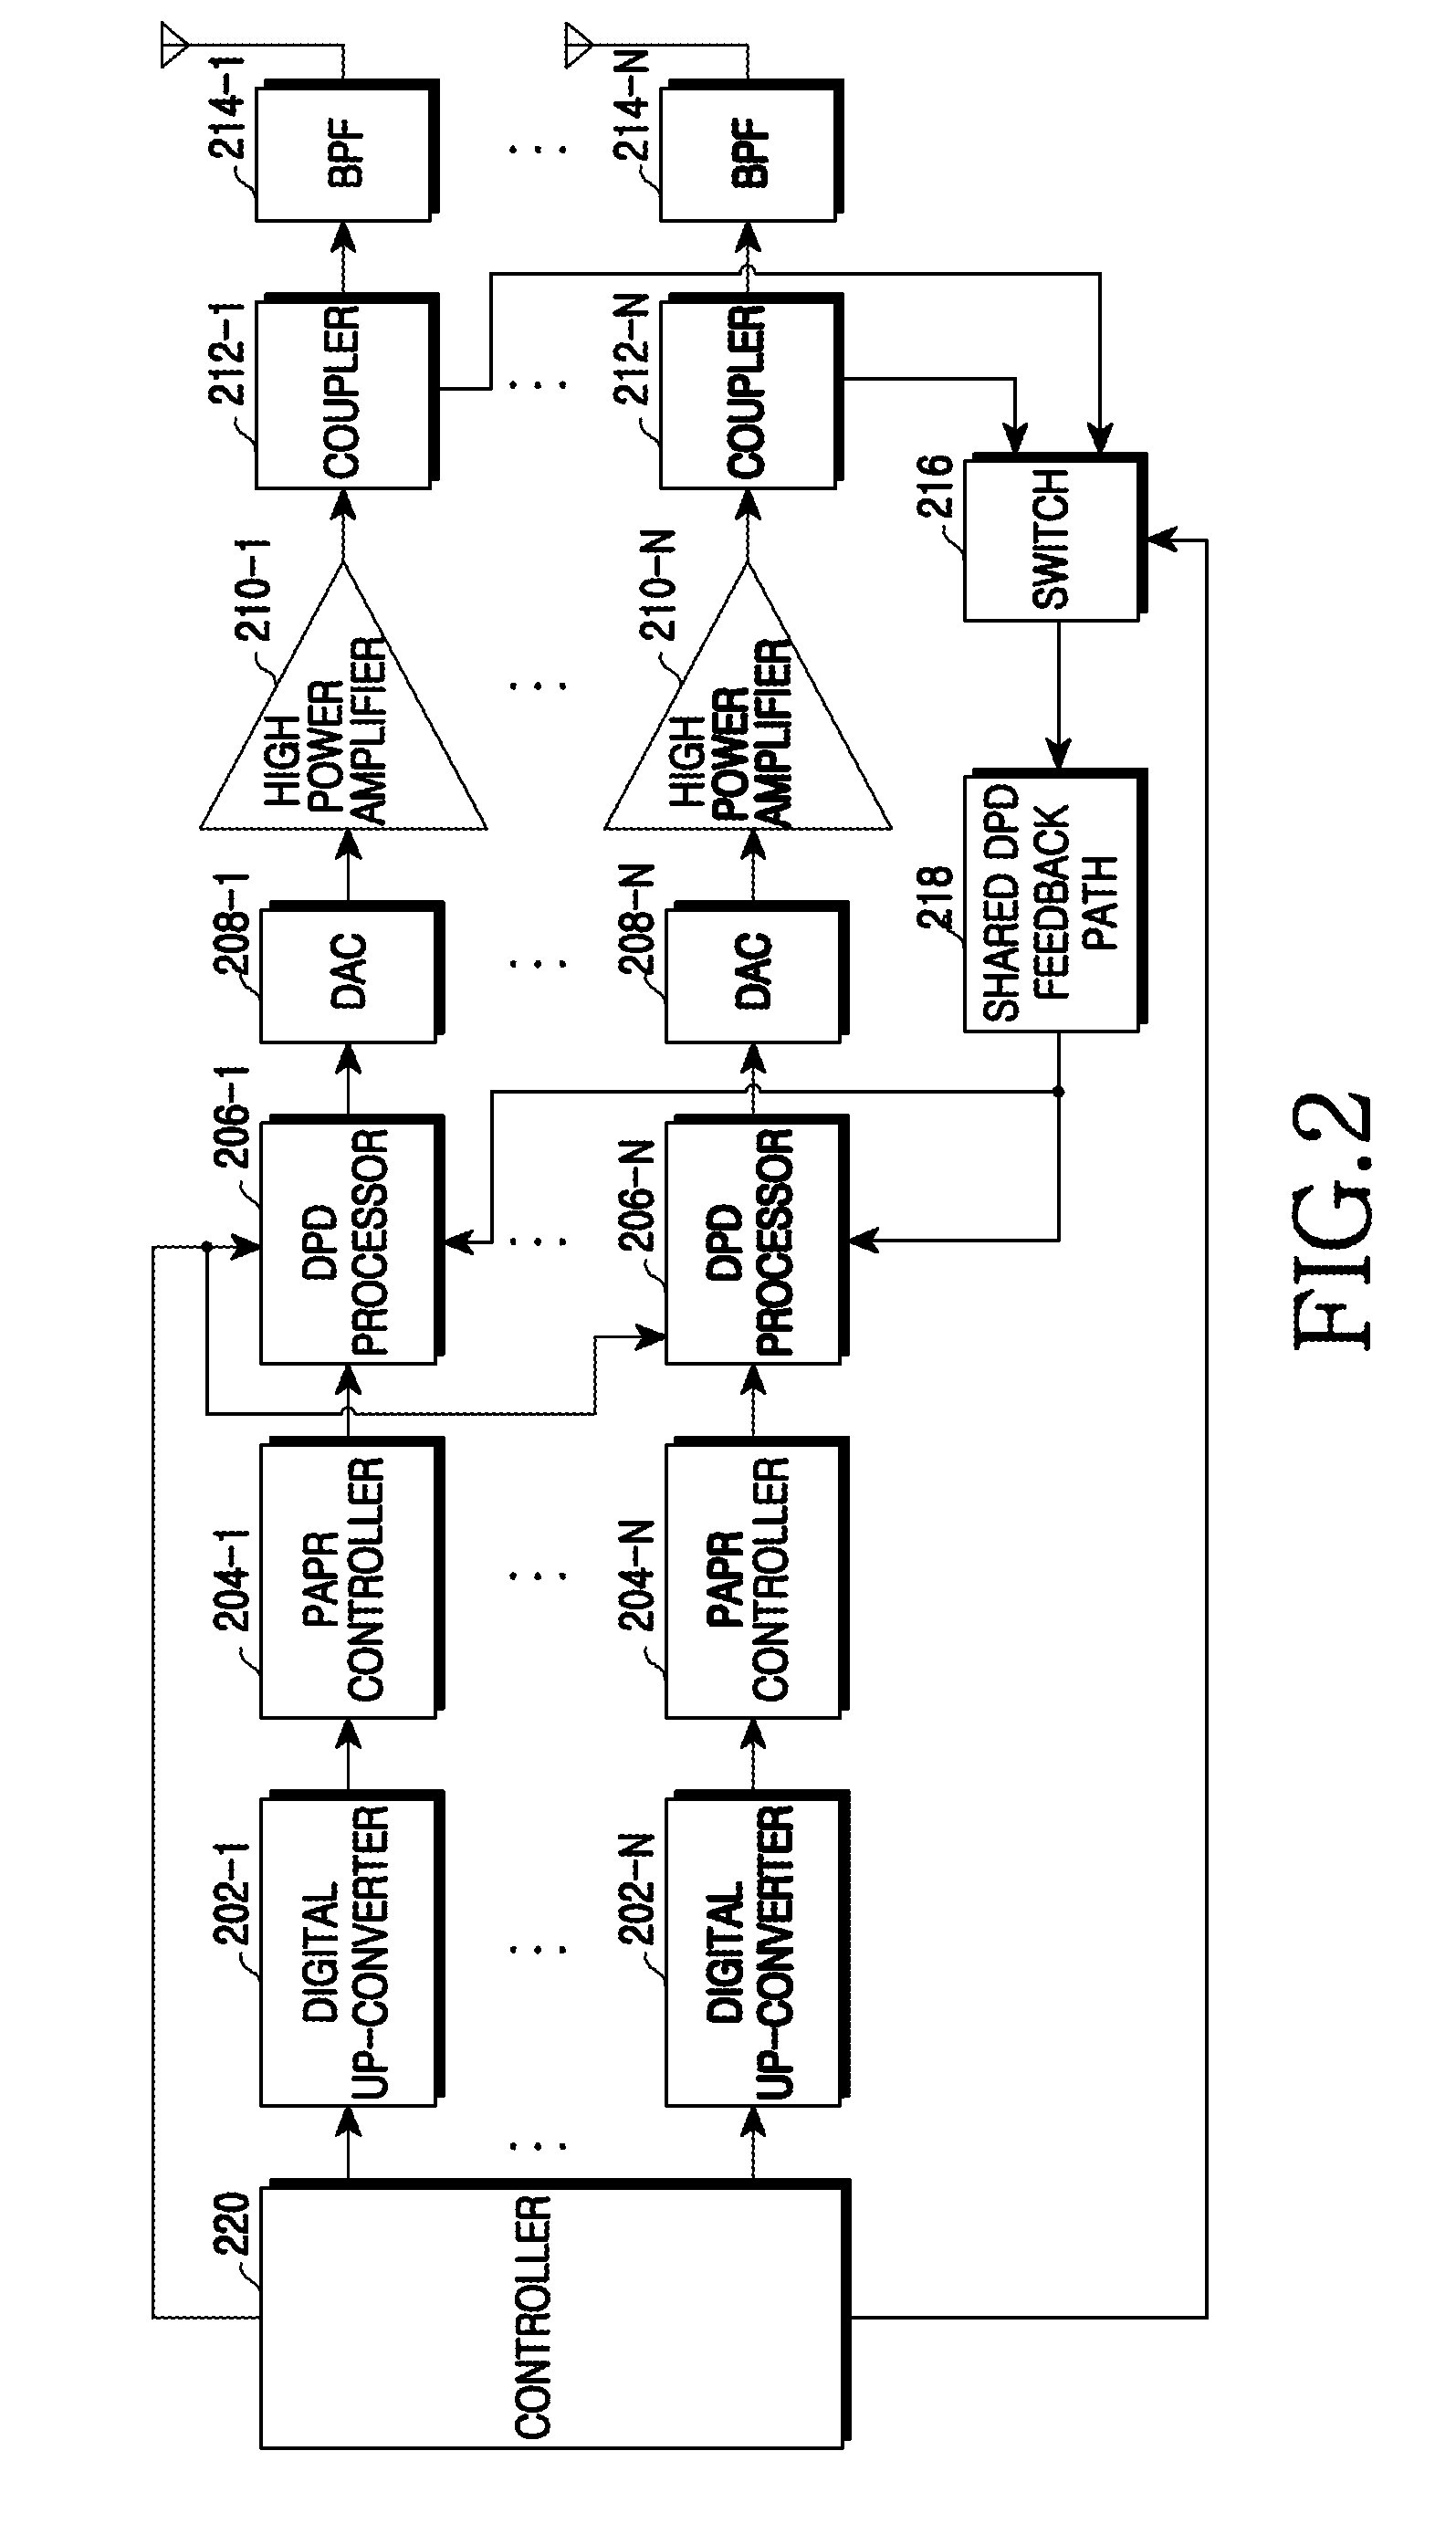 Apparatus and method for digital pre-distortion, sharing feedback path in a multiple antenna wireless communication system